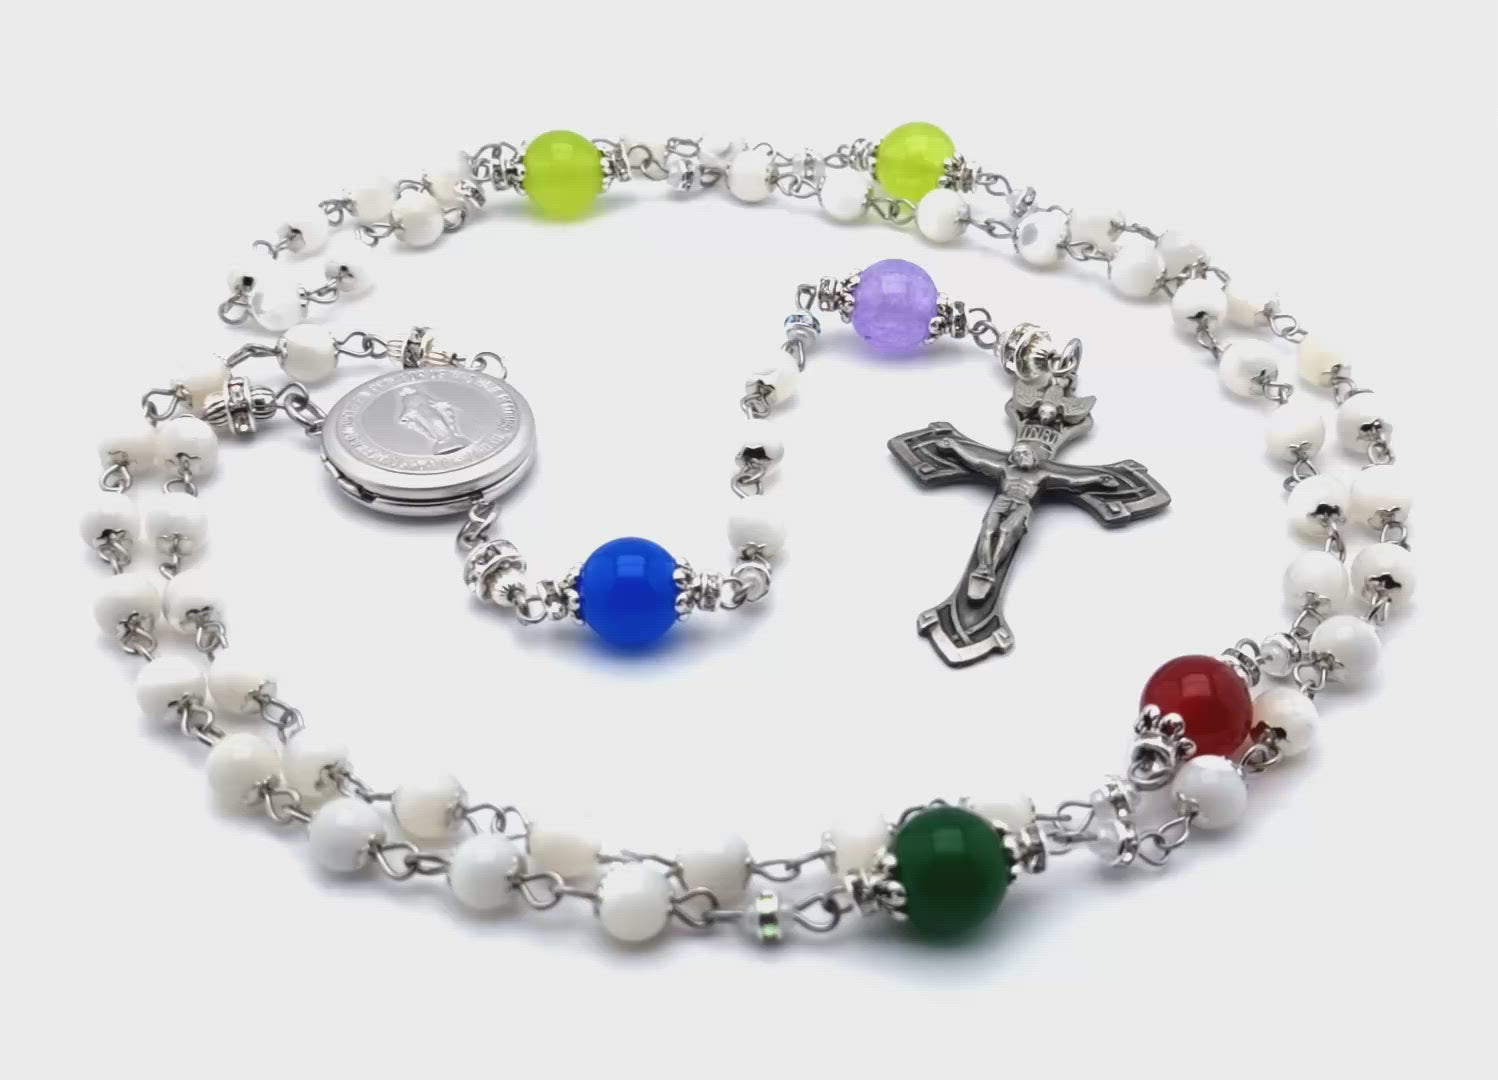 Miraculous Medal unique rosary beads with mother of pearl beads, birthstone gemstone pater beads, pewter crucifix and locket centre medal.